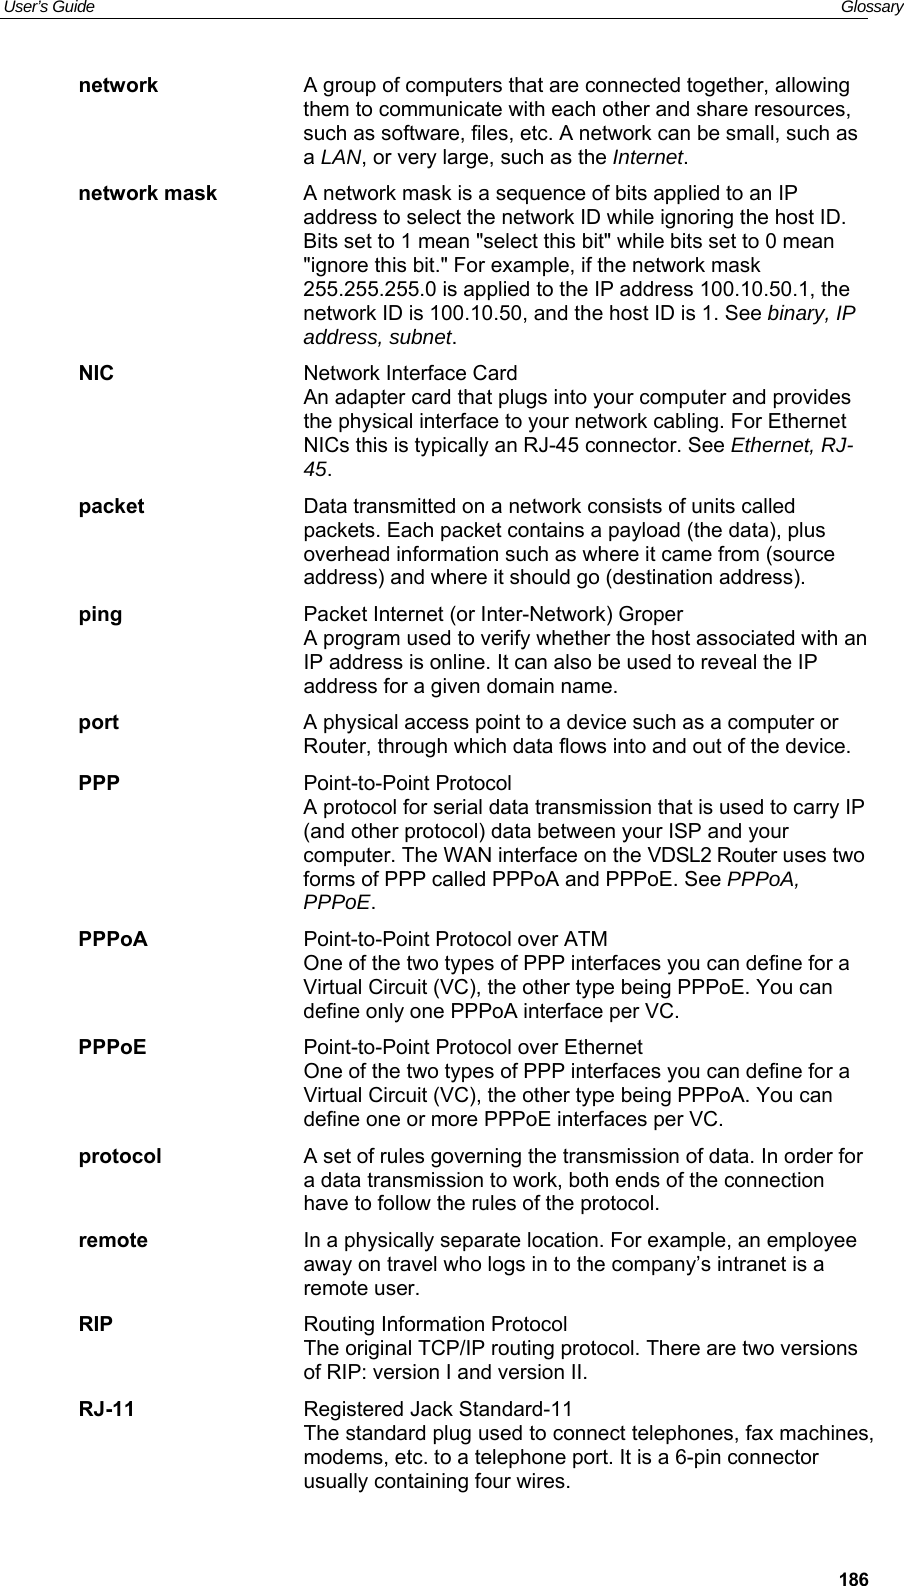 User’s Guide   Glossary  186network  A group of computers that are connected together, allowing them to communicate with each other and share resources, such as software, files, etc. A network can be small, such as a LAN, or very large, such as the Internet. network mask  A network mask is a sequence of bits applied to an IP address to select the network ID while ignoring the host ID. Bits set to 1 mean &quot;select this bit&quot; while bits set to 0 mean &quot;ignore this bit.&quot; For example, if the network mask 255.255.255.0 is applied to the IP address 100.10.50.1, the network ID is 100.10.50, and the host ID is 1. See binary, IP address, subnet. NIC  Network Interface Card An adapter card that plugs into your computer and provides the physical interface to your network cabling. For Ethernet NICs this is typically an RJ-45 connector. See Ethernet, RJ-45. packet  Data transmitted on a network consists of units called packets. Each packet contains a payload (the data), plus overhead information such as where it came from (source address) and where it should go (destination address). ping  Packet Internet (or Inter-Network) Groper A program used to verify whether the host associated with an IP address is online. It can also be used to reveal the IP address for a given domain name.  port  A physical access point to a device such as a computer or Router, through which data flows into and out of the device. PPP  Point-to-Point Protocol A protocol for serial data transmission that is used to carry IP (and other protocol) data between your ISP and your computer. The WAN interface on the VDSL2 Router uses two forms of PPP called PPPoA and PPPoE. See PPPoA, PPPoE. PPPoA  Point-to-Point Protocol over ATM One of the two types of PPP interfaces you can define for a Virtual Circuit (VC), the other type being PPPoE. You can define only one PPPoA interface per VC. PPPoE  Point-to-Point Protocol over Ethernet One of the two types of PPP interfaces you can define for a Virtual Circuit (VC), the other type being PPPoA. You can define one or more PPPoE interfaces per VC. protocol  A set of rules governing the transmission of data. In order for a data transmission to work, both ends of the connection have to follow the rules of the protocol. remote  In a physically separate location. For example, an employee away on travel who logs in to the company’s intranet is a remote user. RIP  Routing Information Protocol The original TCP/IP routing protocol. There are two versions of RIP: version I and version II.  RJ-11  Registered Jack Standard-11 The standard plug used to connect telephones, fax machines, modems, etc. to a telephone port. It is a 6-pin connector usually containing four wires. 